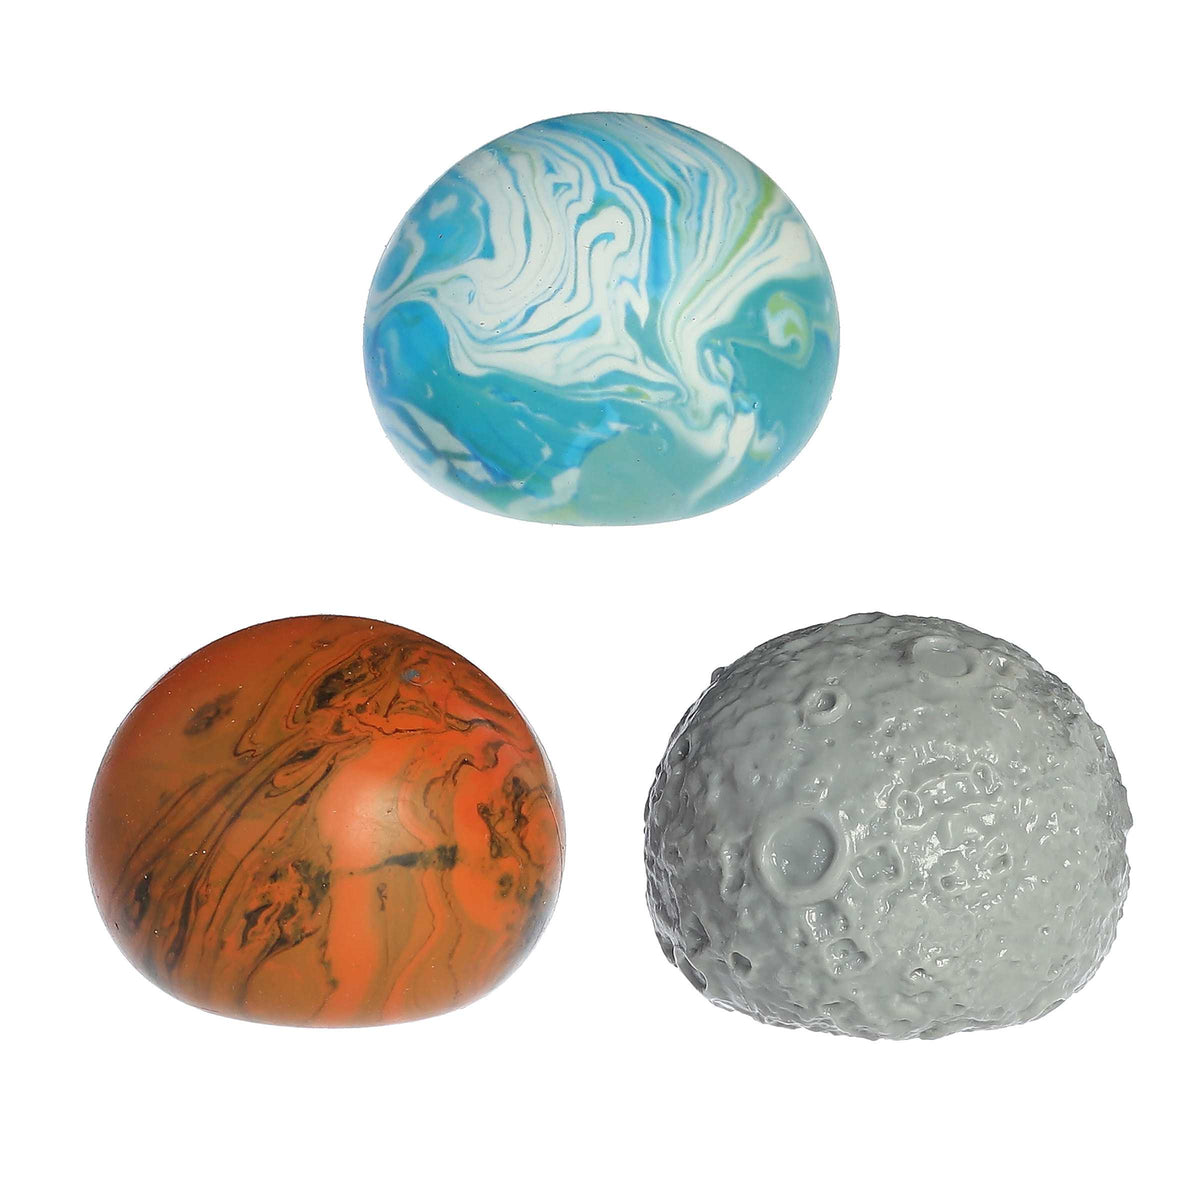 Earth, Mars + Moon Balls, planetary stress balls that offer a tactile way to learn about space and manage stress